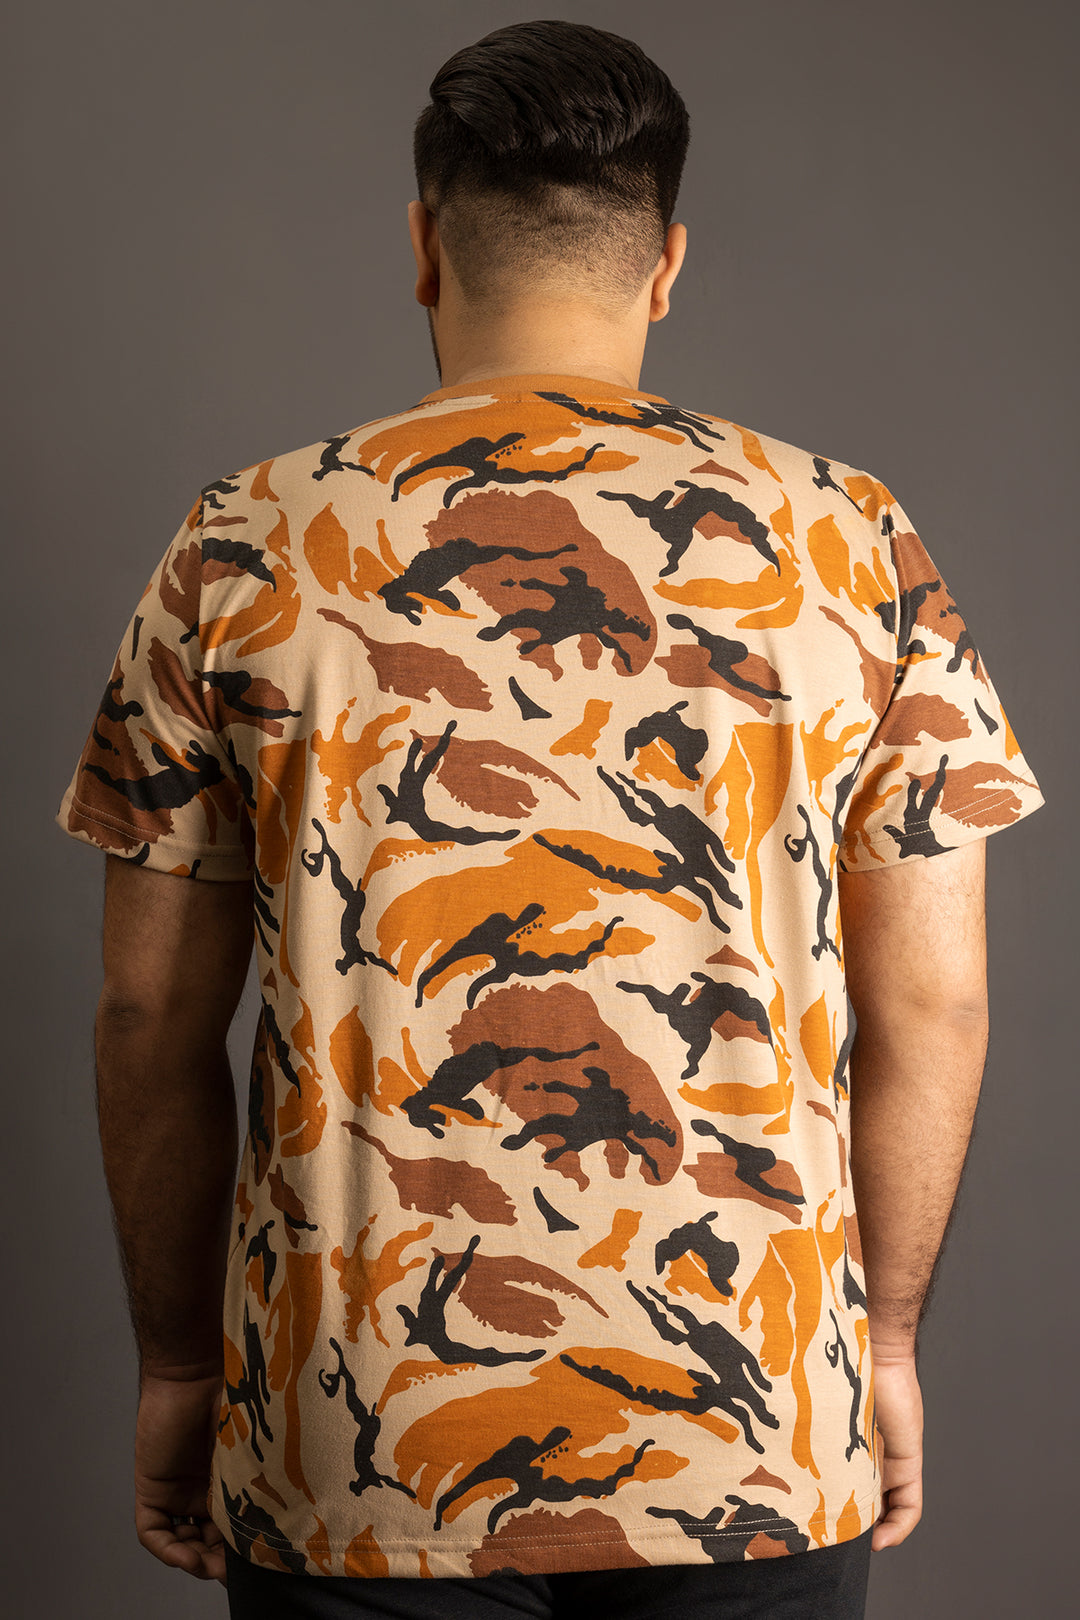 Nomad Camo Printed T-Shirt with Leather Patch (Plus Size) - A24 - MT0324P